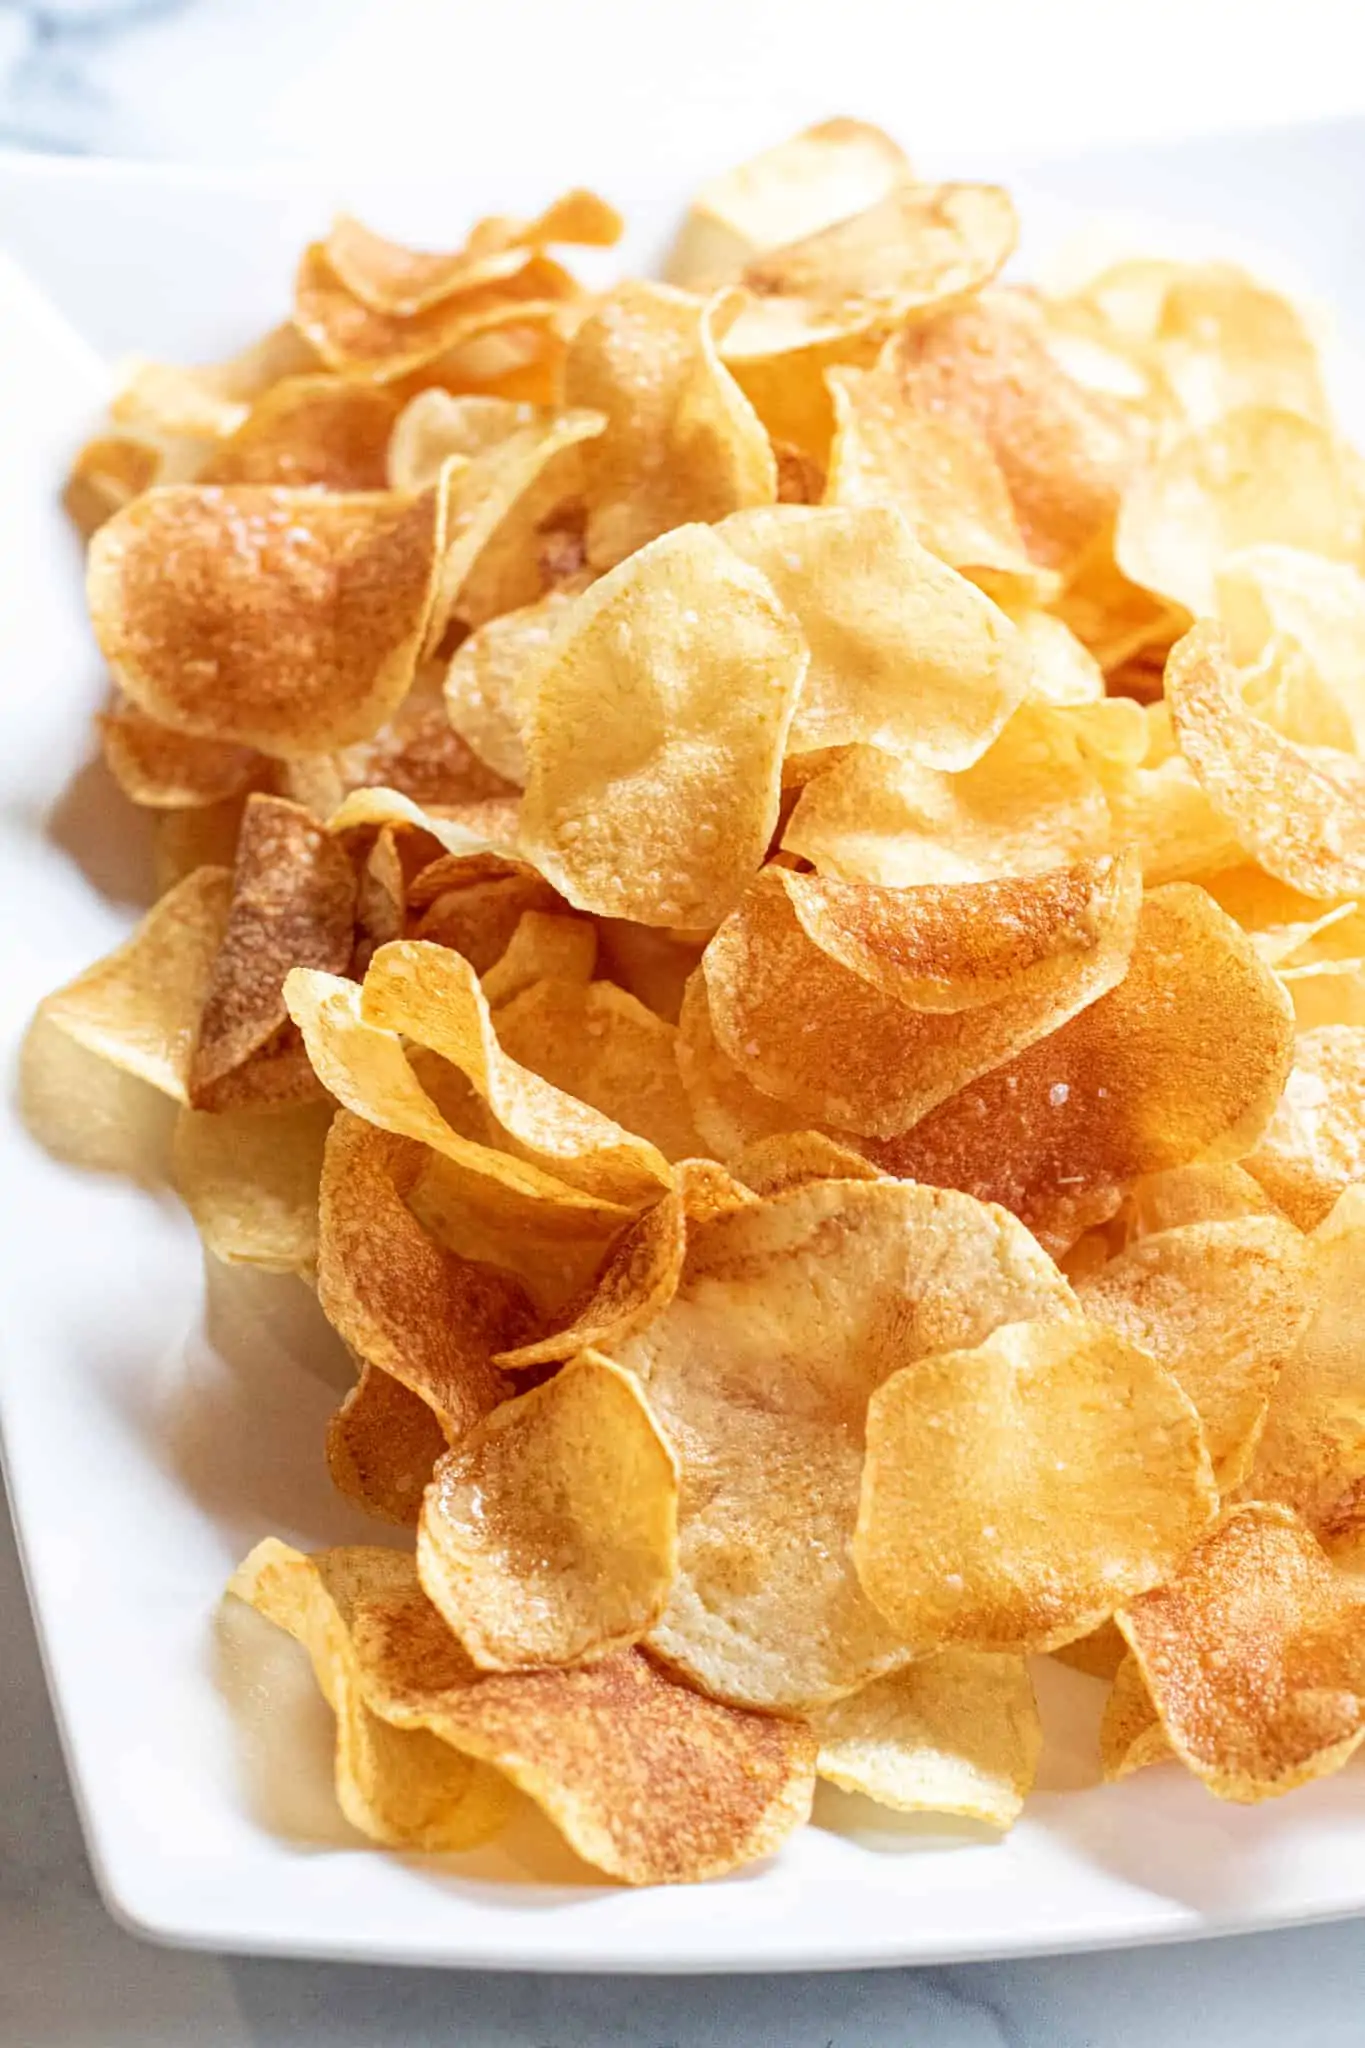 A plate of thin crispy potato chips. Sides for sandwiches. Sides for pulled pork sandwiches.